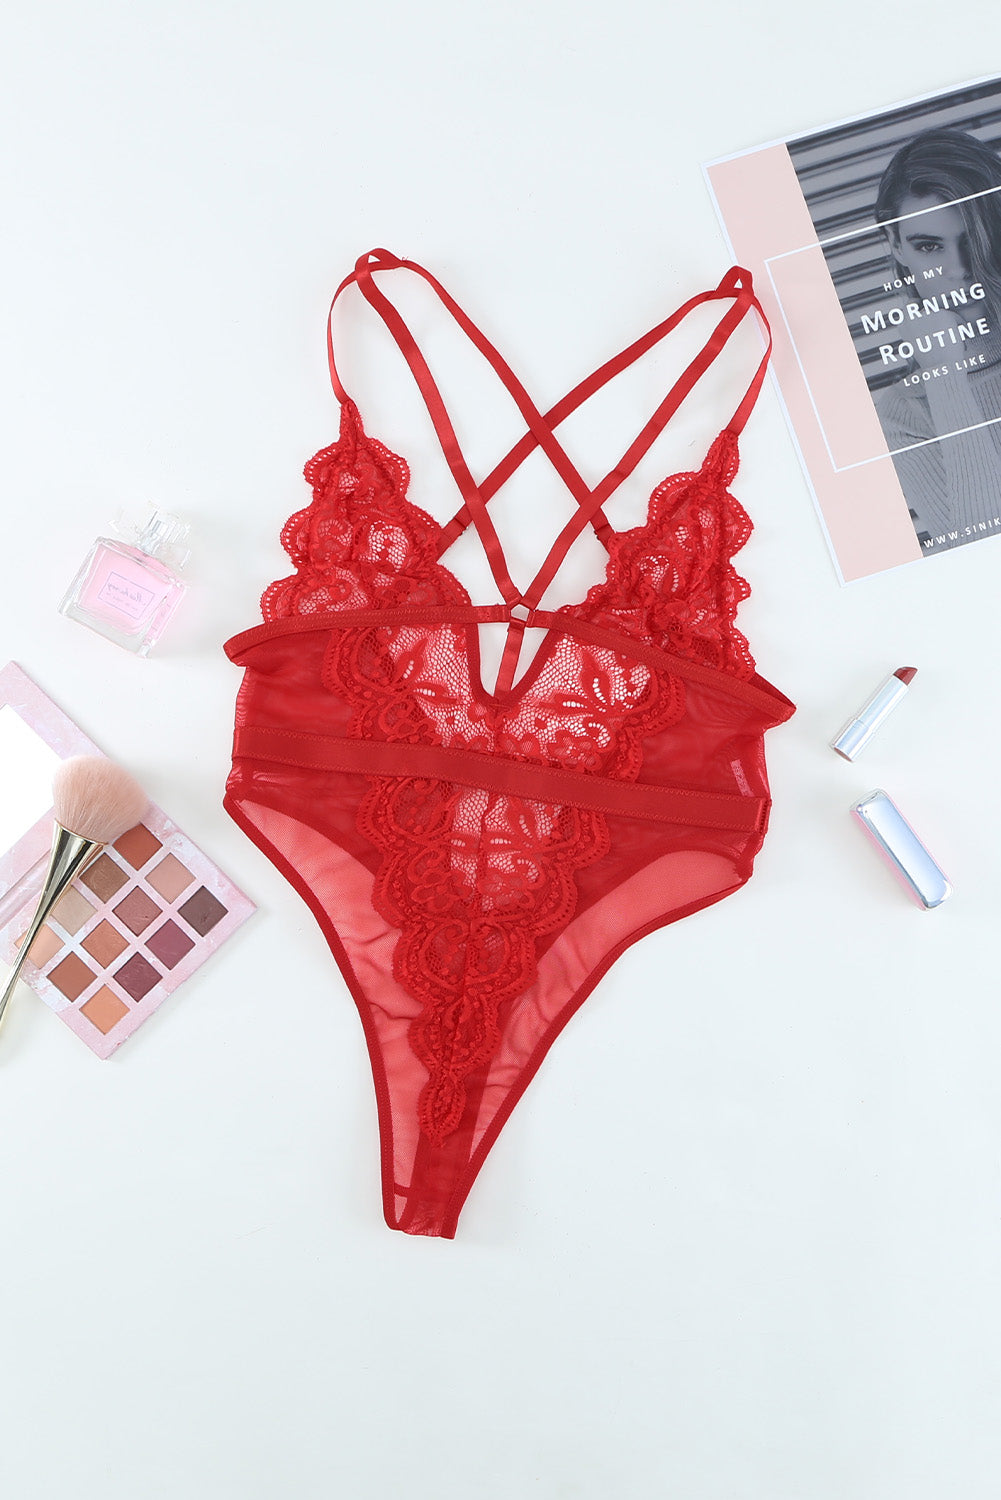 Red Lace High Leg Teddy Lingerie